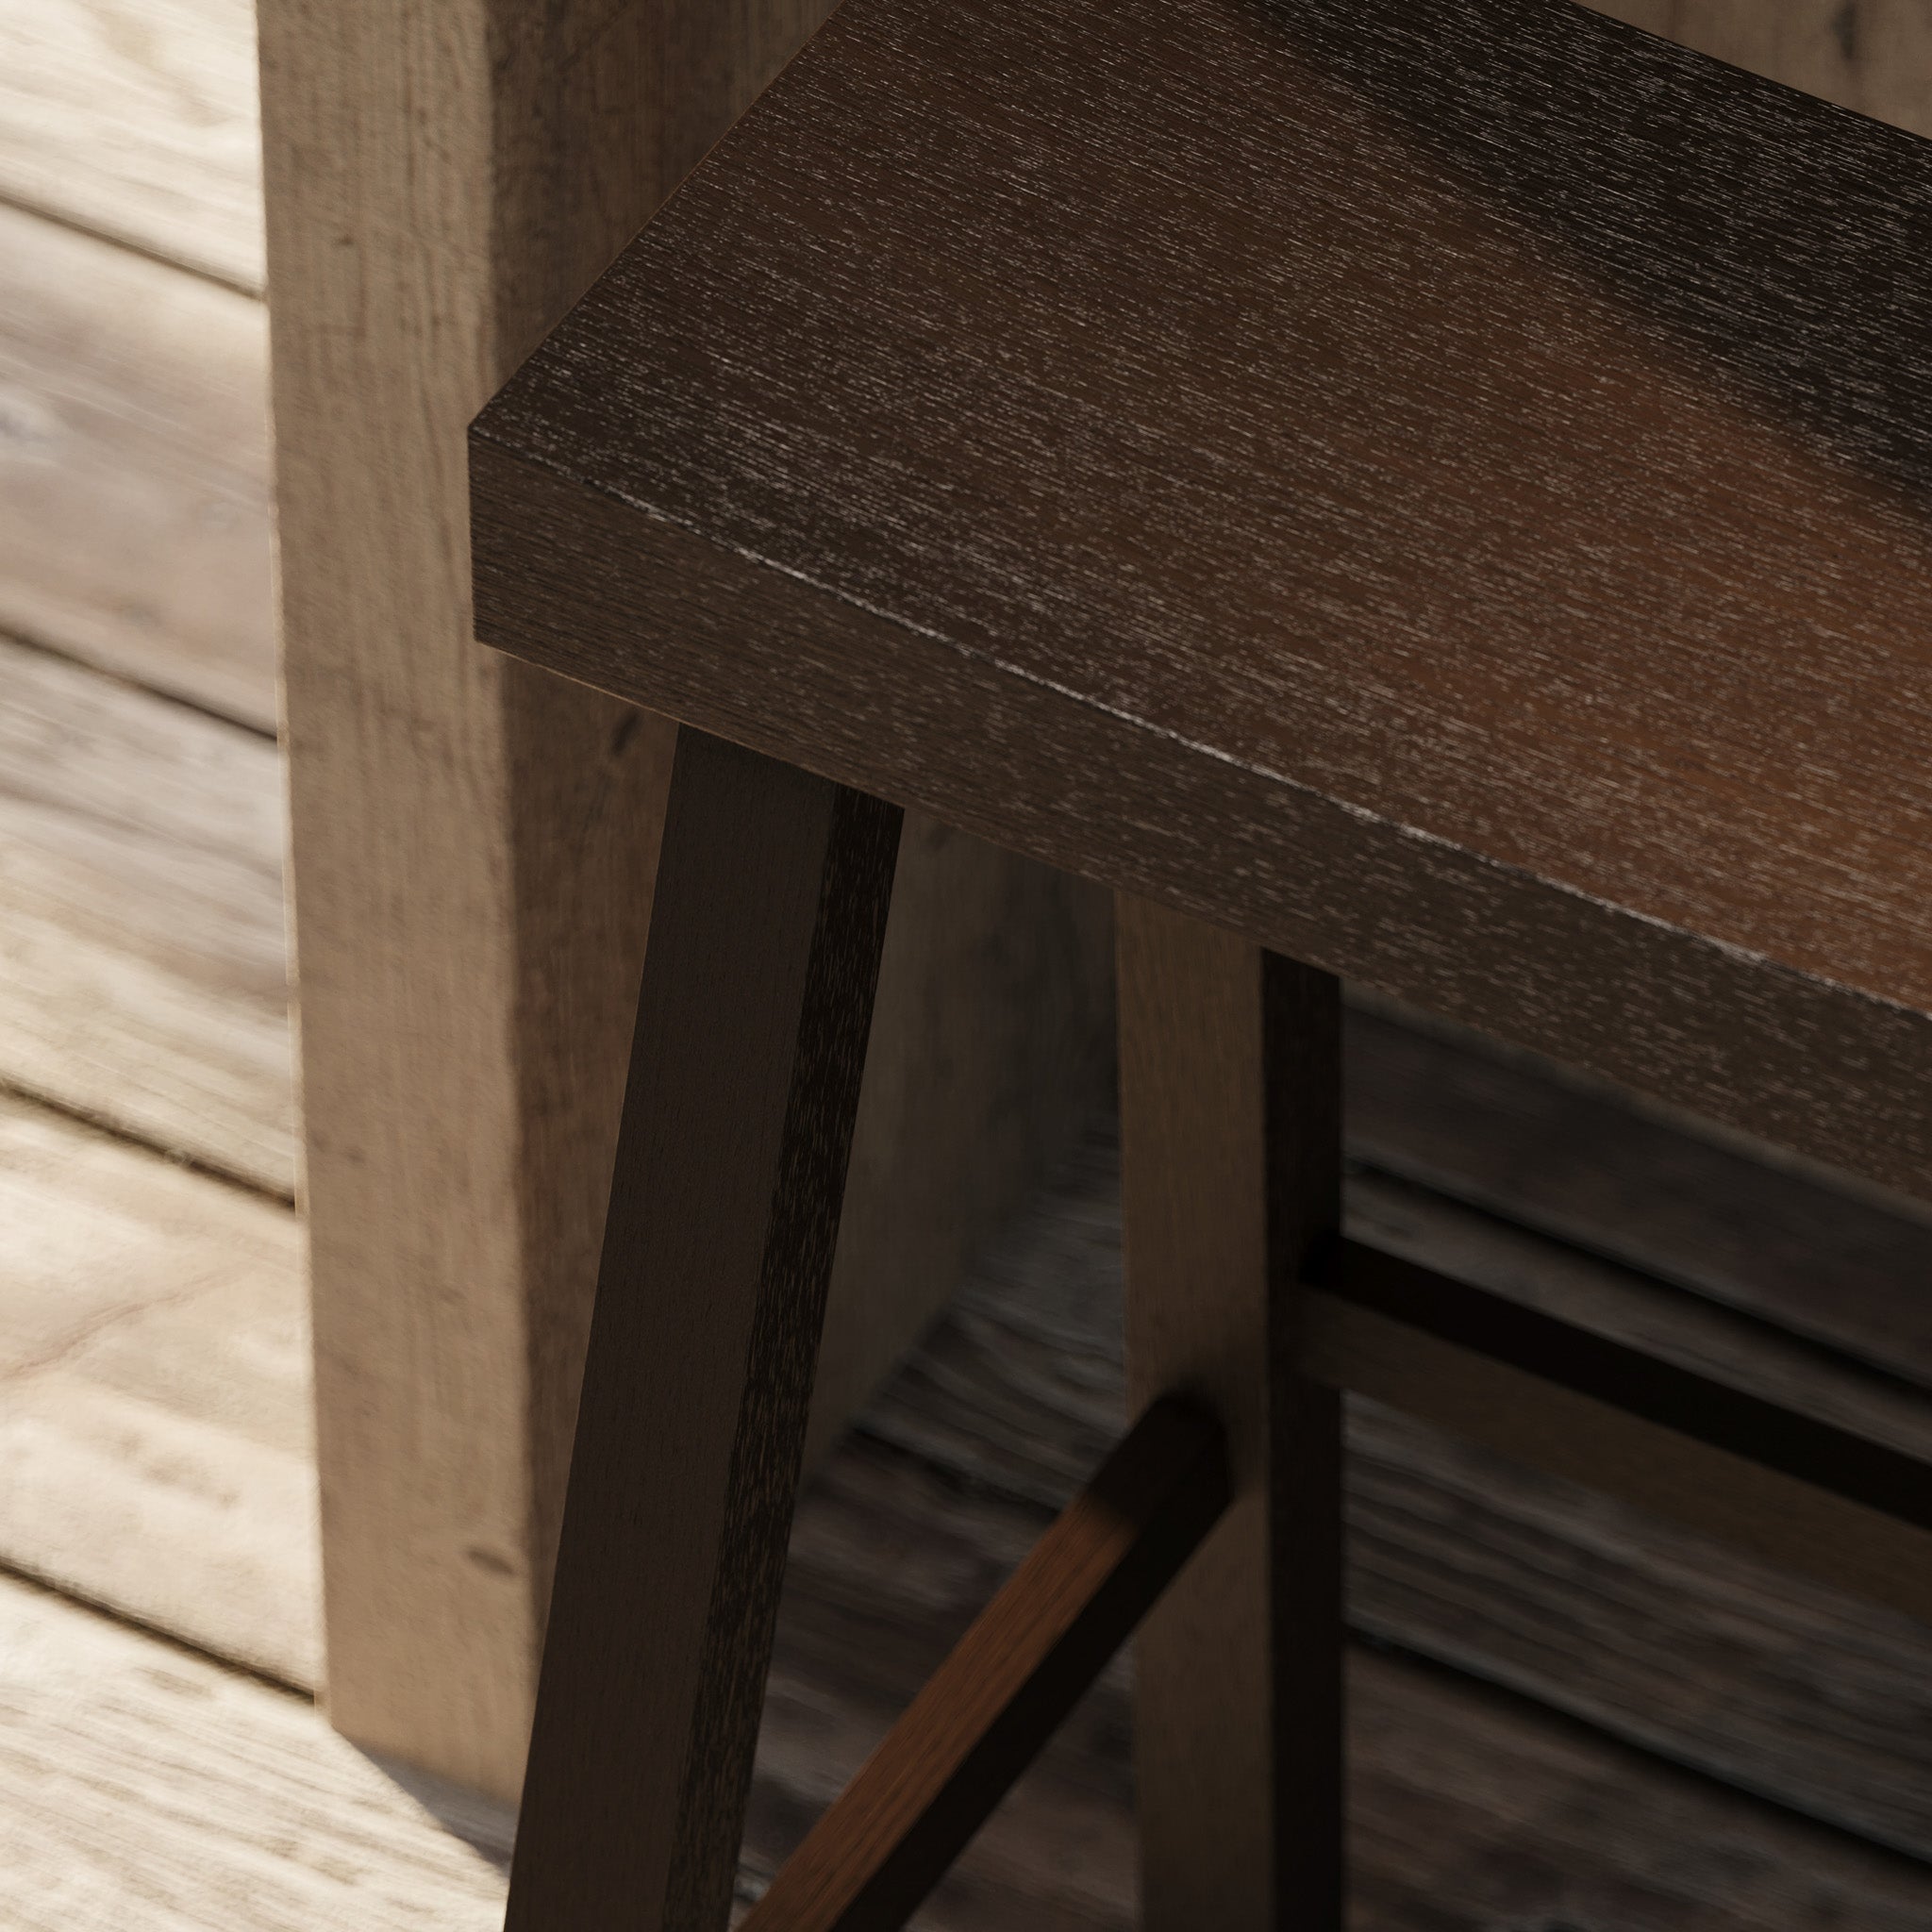 Vincent Bar Stool in Antiqued Brown Finish in Stools by Maven Lane